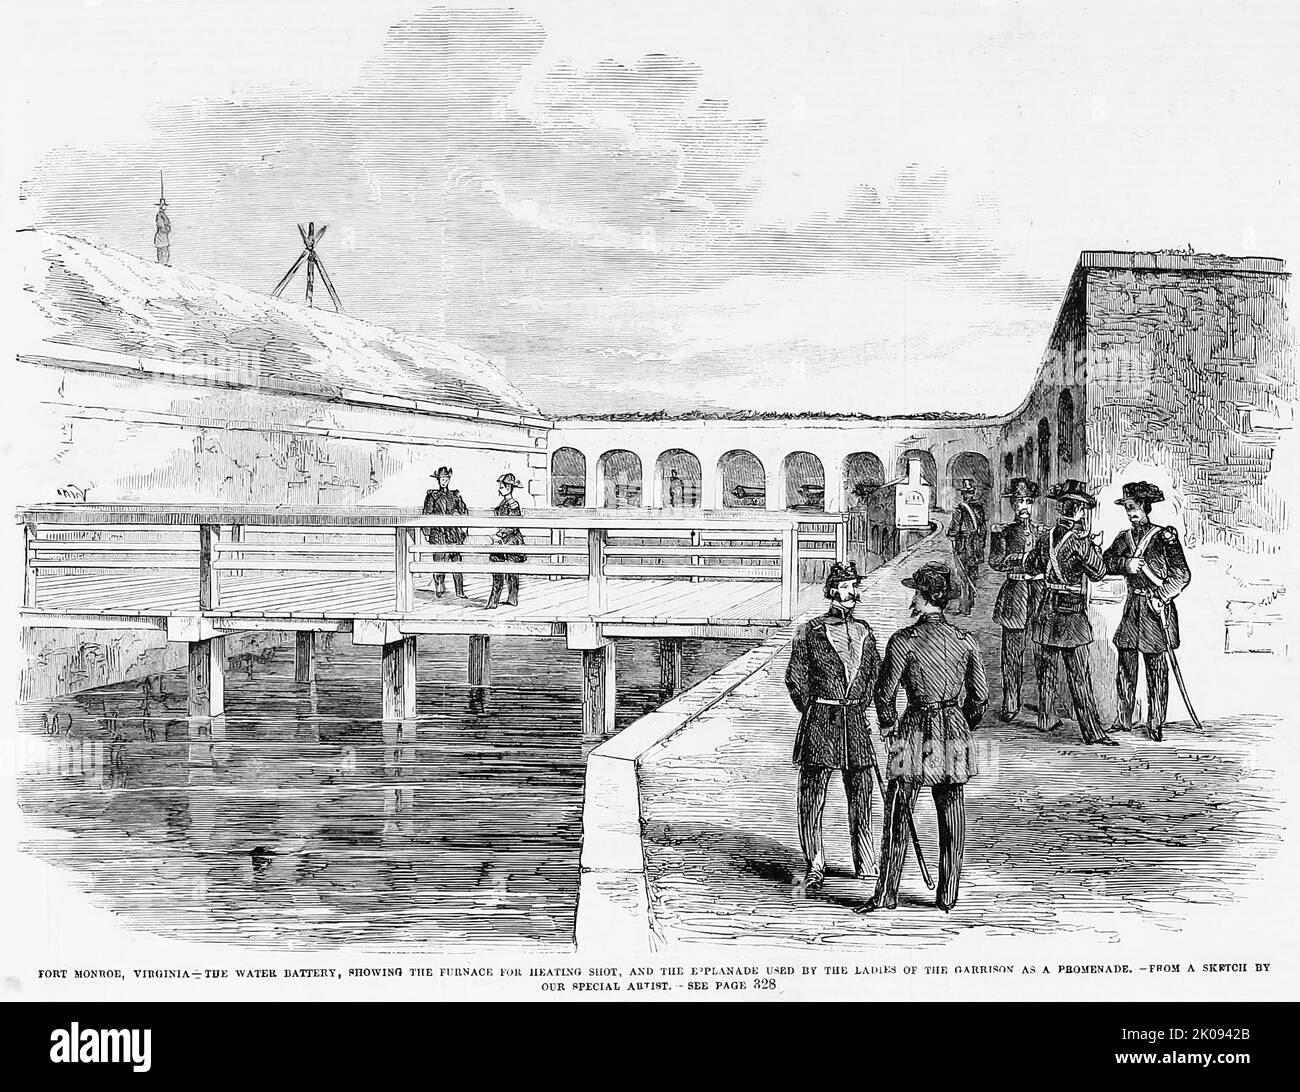 Fort Monroe, Virginia - The water battery, showing the furnace for heating shot, and the esplanade used by the ladies of the garrison as a promenade (1861). 19th century American Civil War illustration from Frank Leslie's Illustrated Newspaper Stock Photo